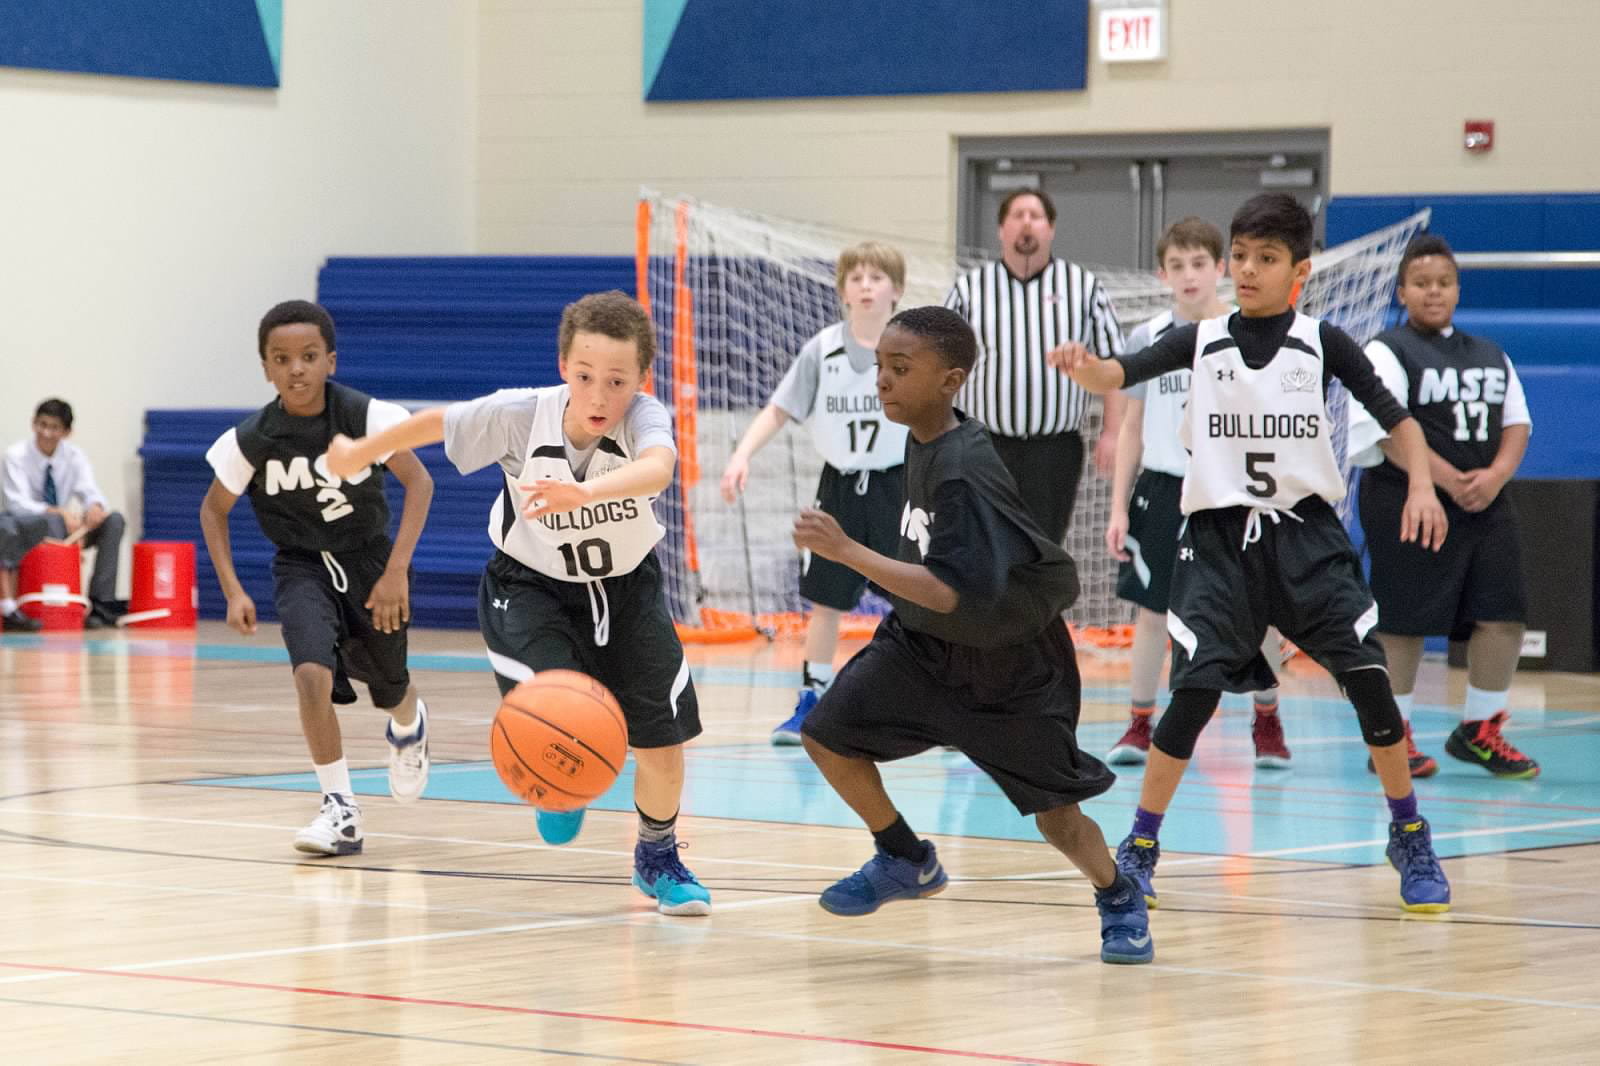 3 More Wins for Primary Basketball Teams - 3-more-wins-for-primary-basketball-teams